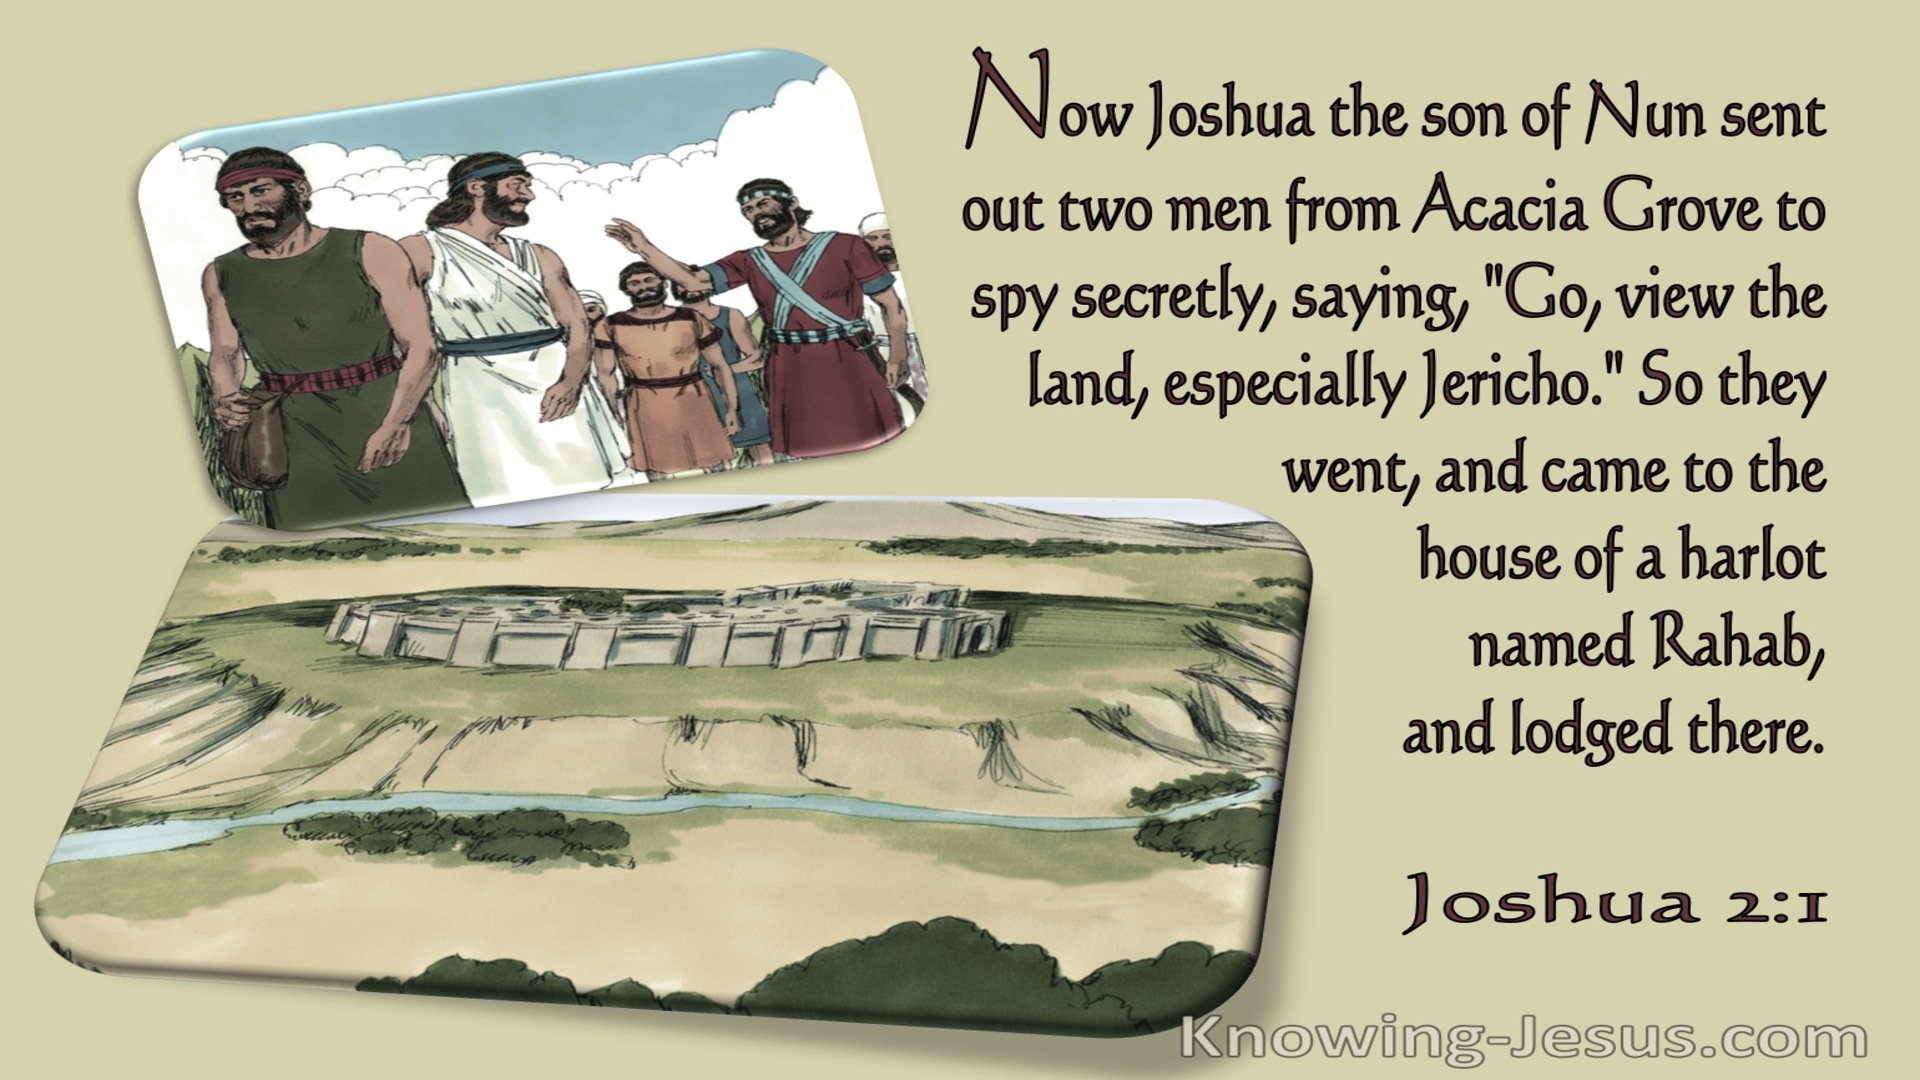 Joshua 2:1 They Came To The Houese Of A Harlet Named Rahab (cream)